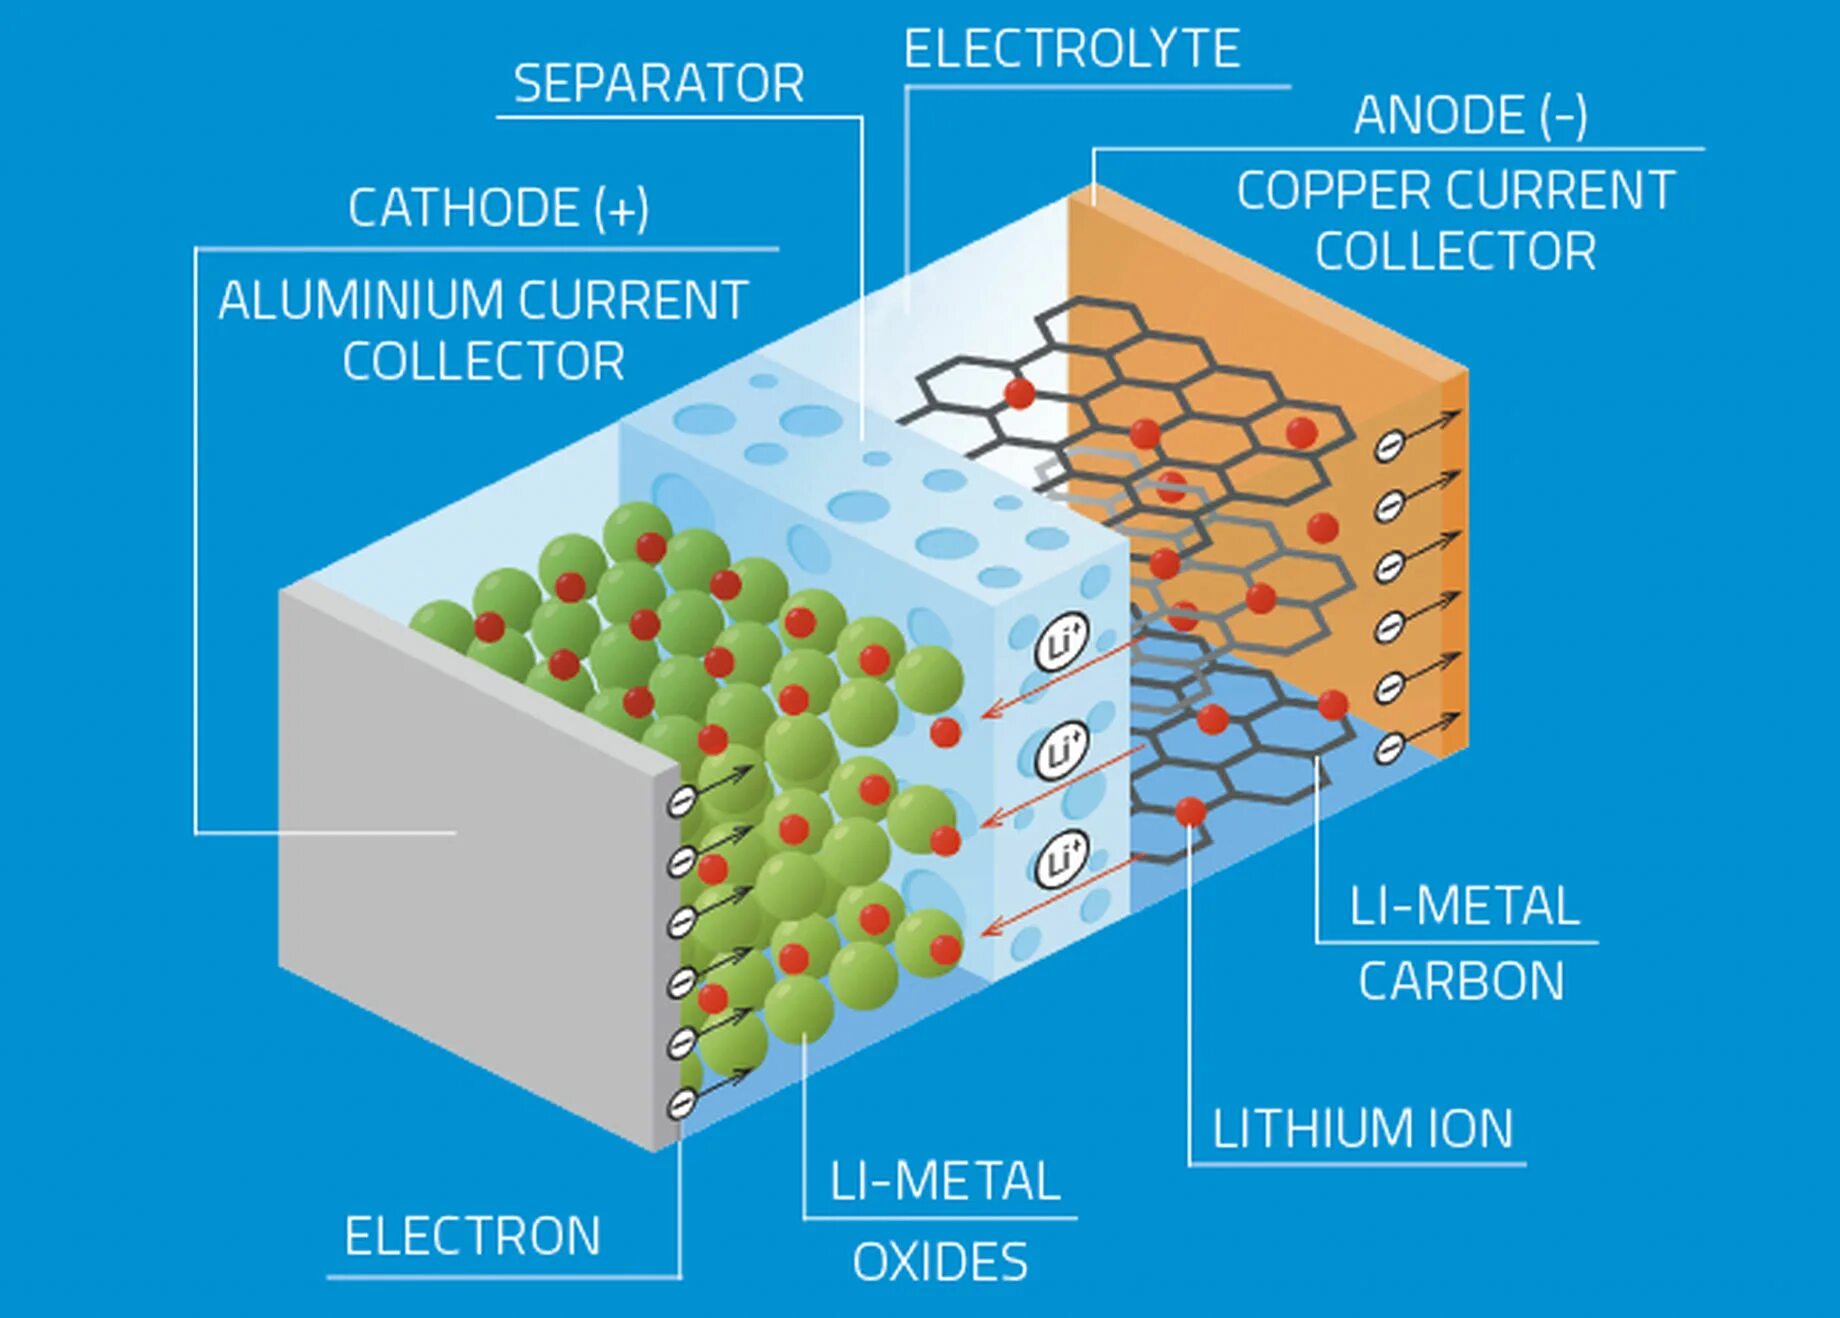 Lithium ion Battery. Lithium ion Batteries recucling. Li ion Battery Laboratory. The structure of the Lithium ion Battery.